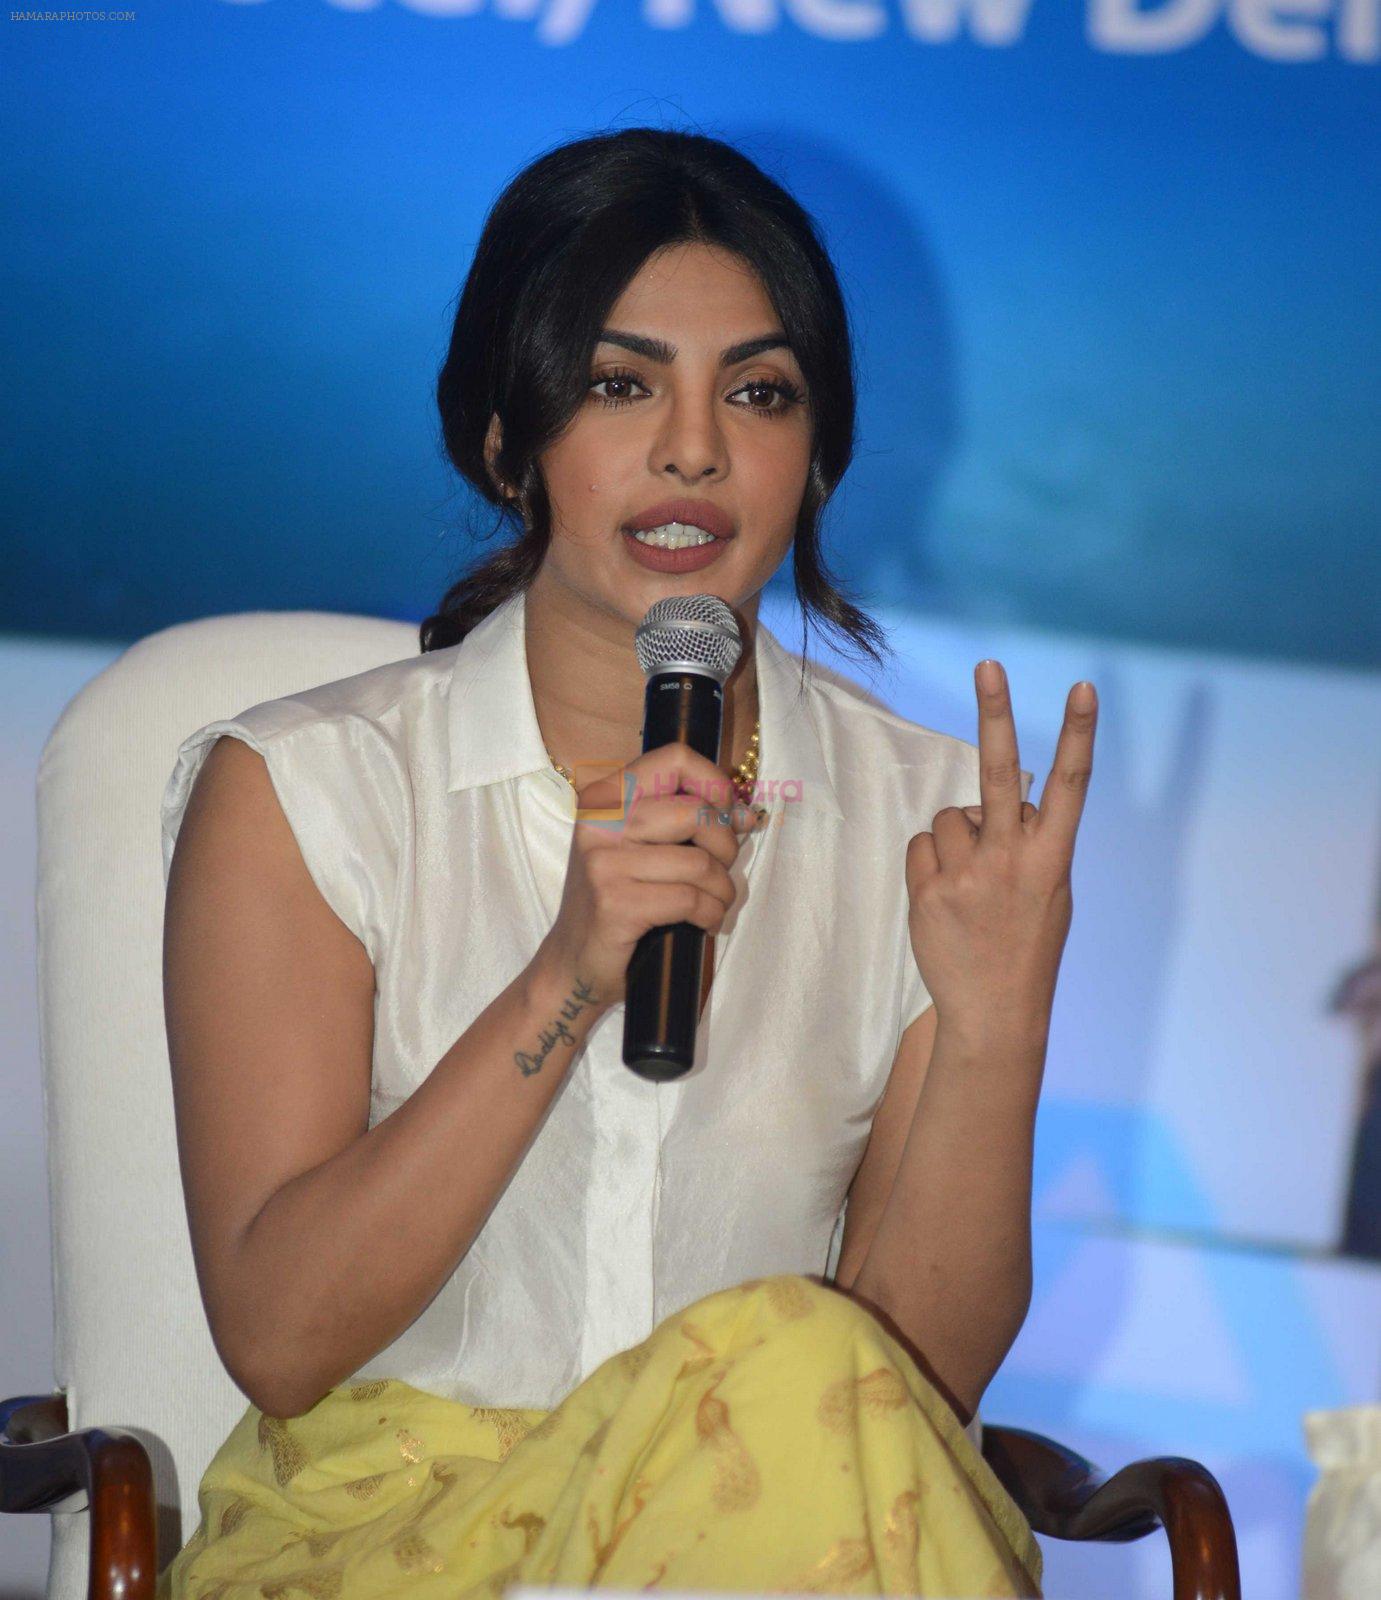 Priyanka Chopra during the Fair Start campaign with UNICEF in Imperial Hotel in New Delhi on 5th July 2016